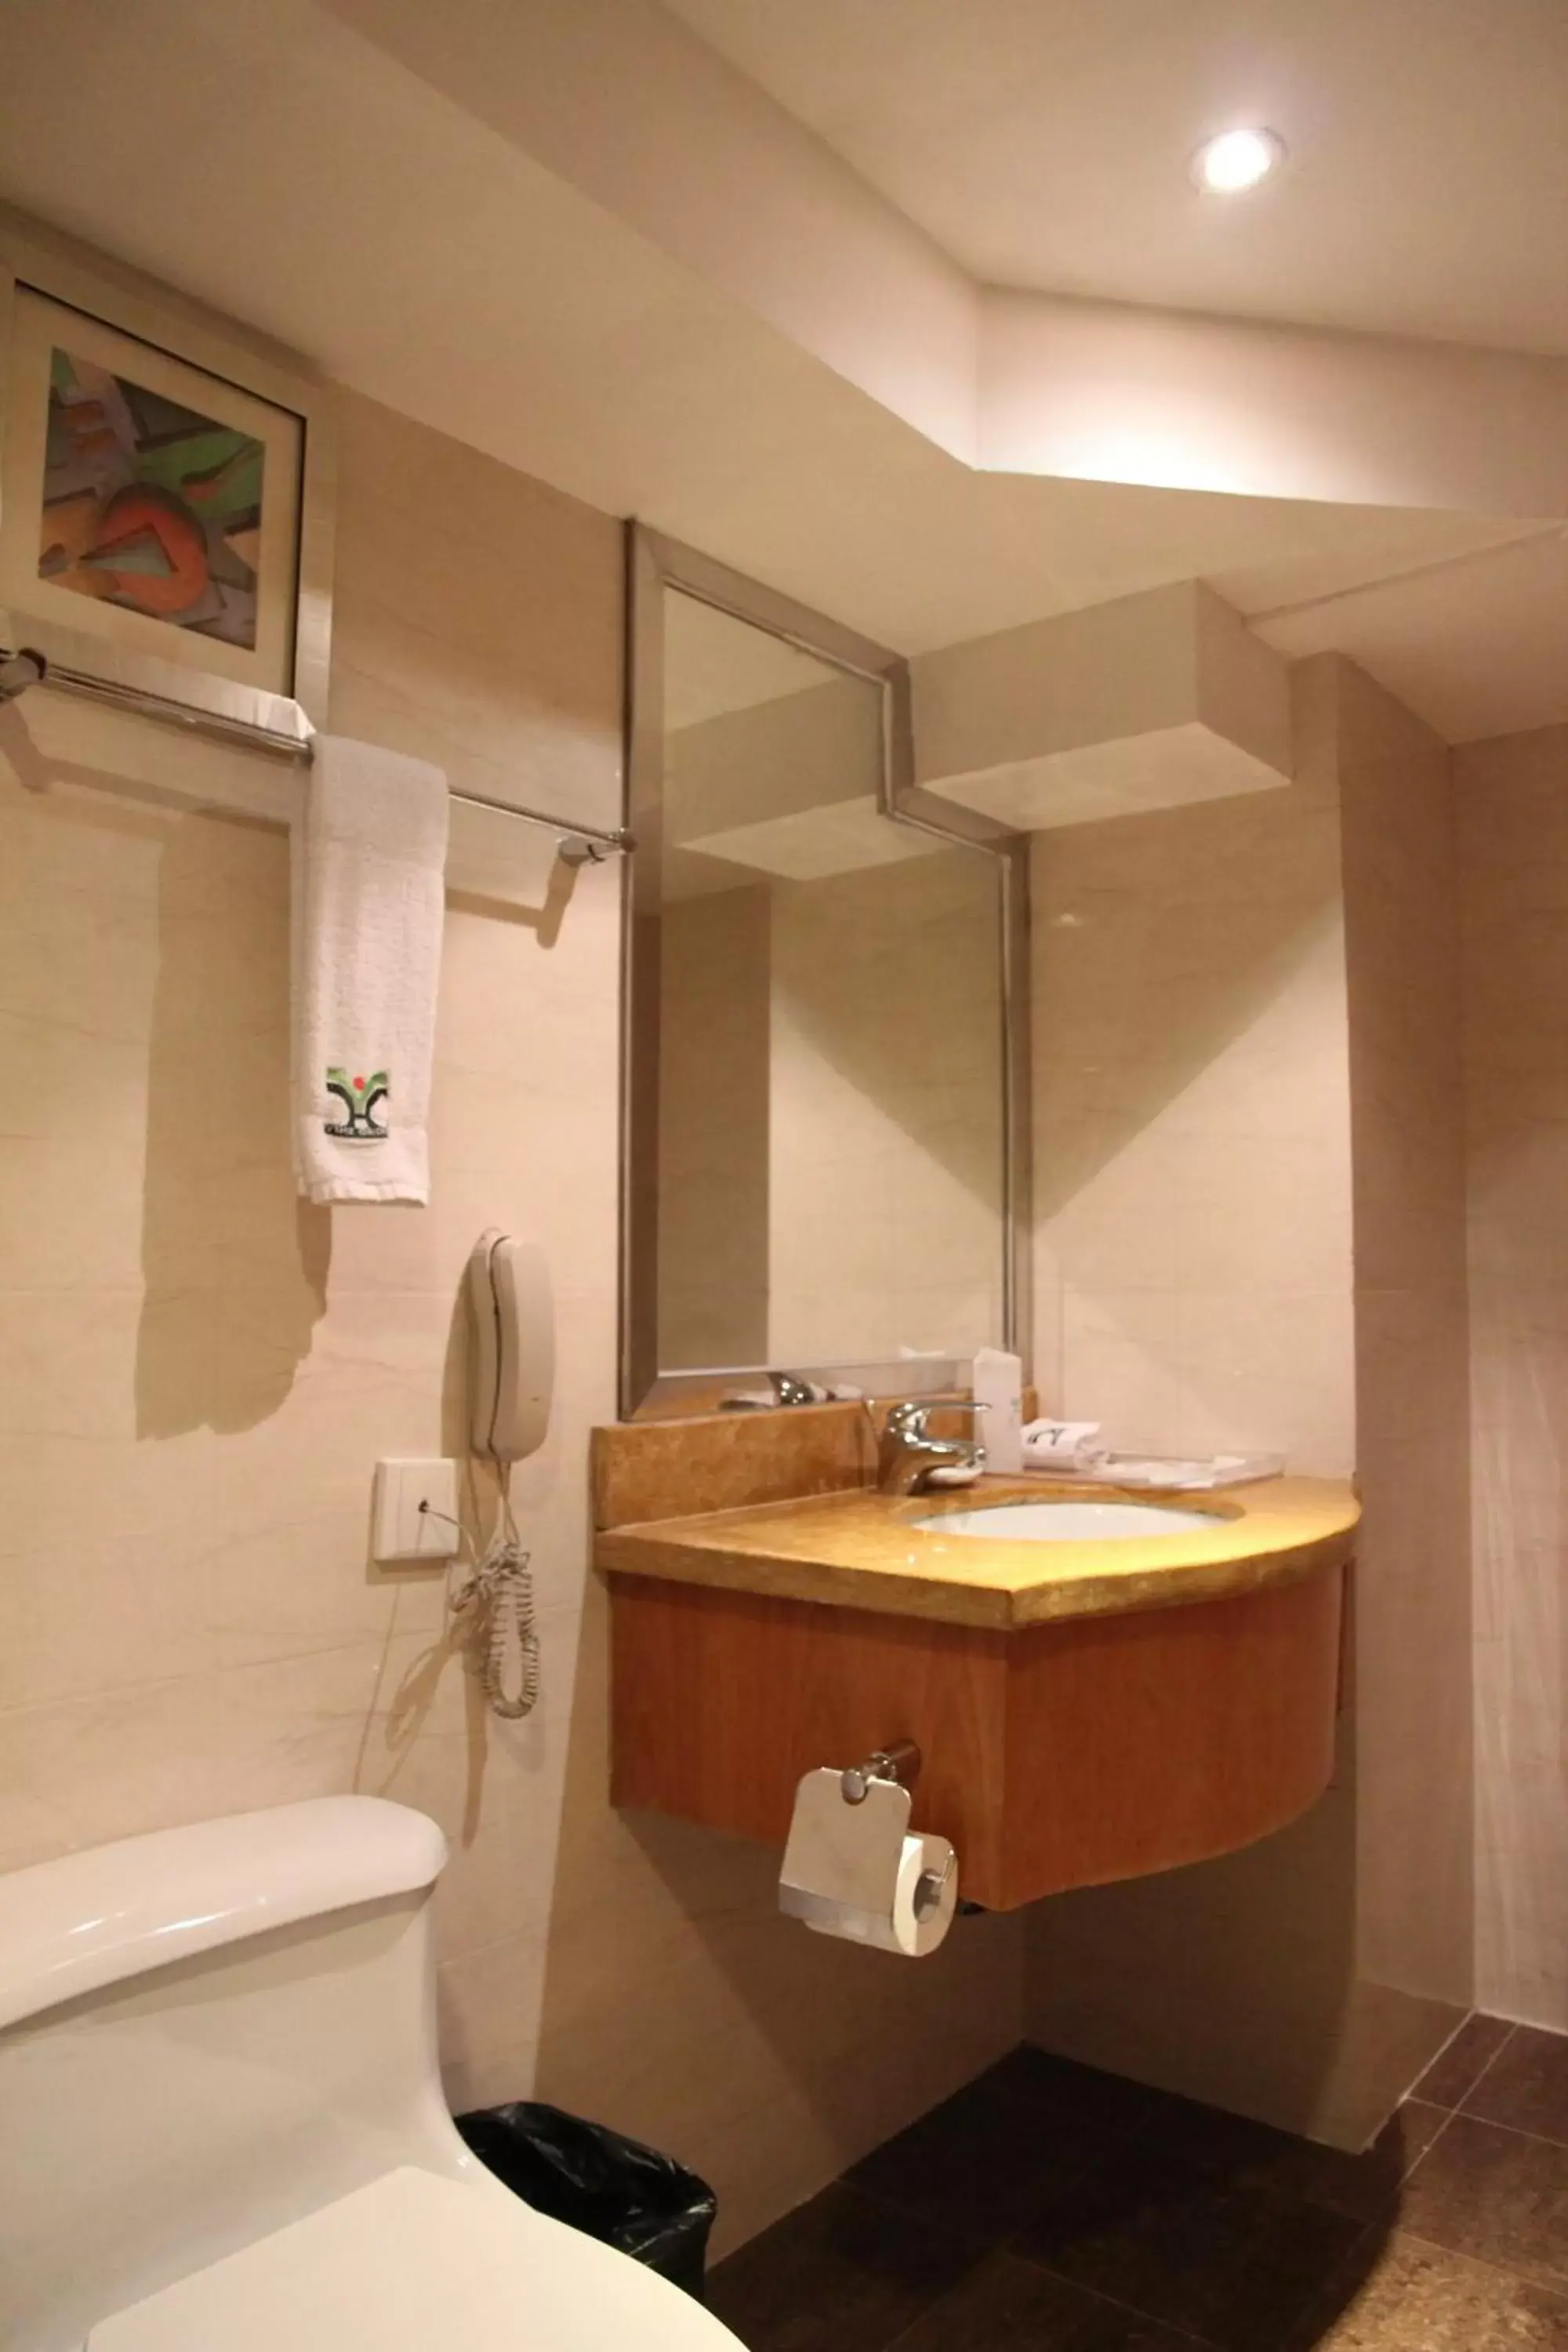 Bathroom in Yihe Hotel Ouzhuang